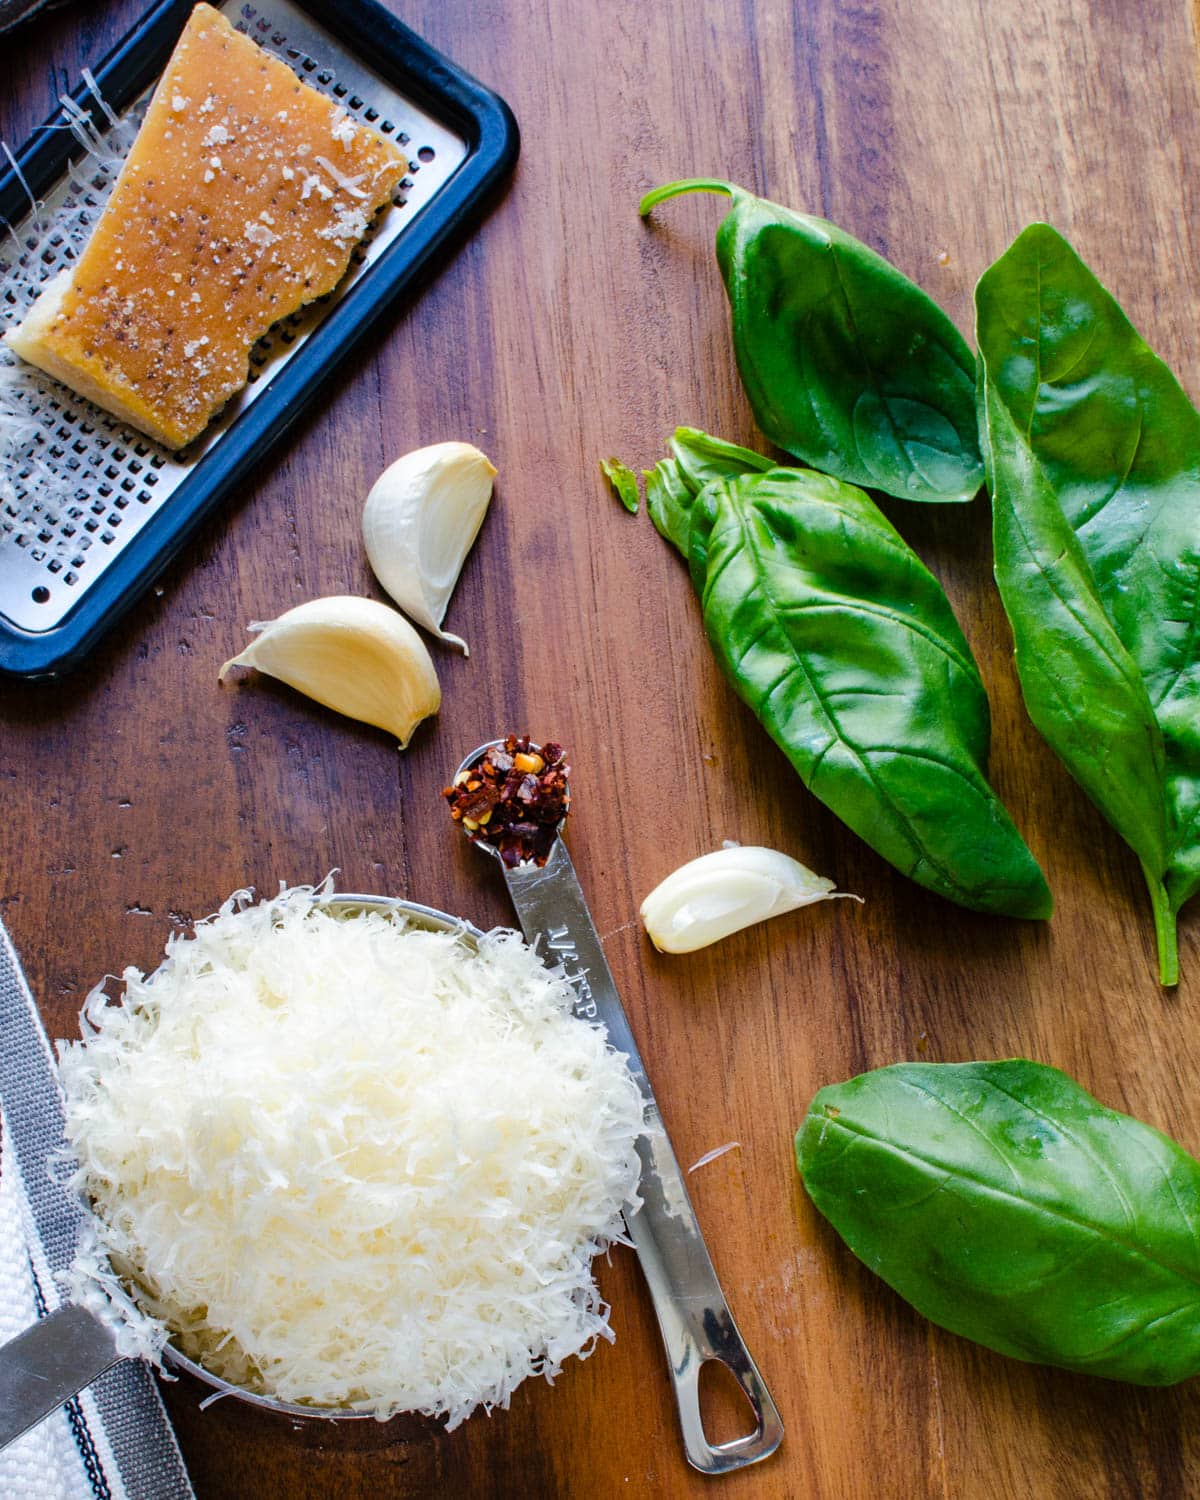 Ingredients to make the pesto with pine nuts.